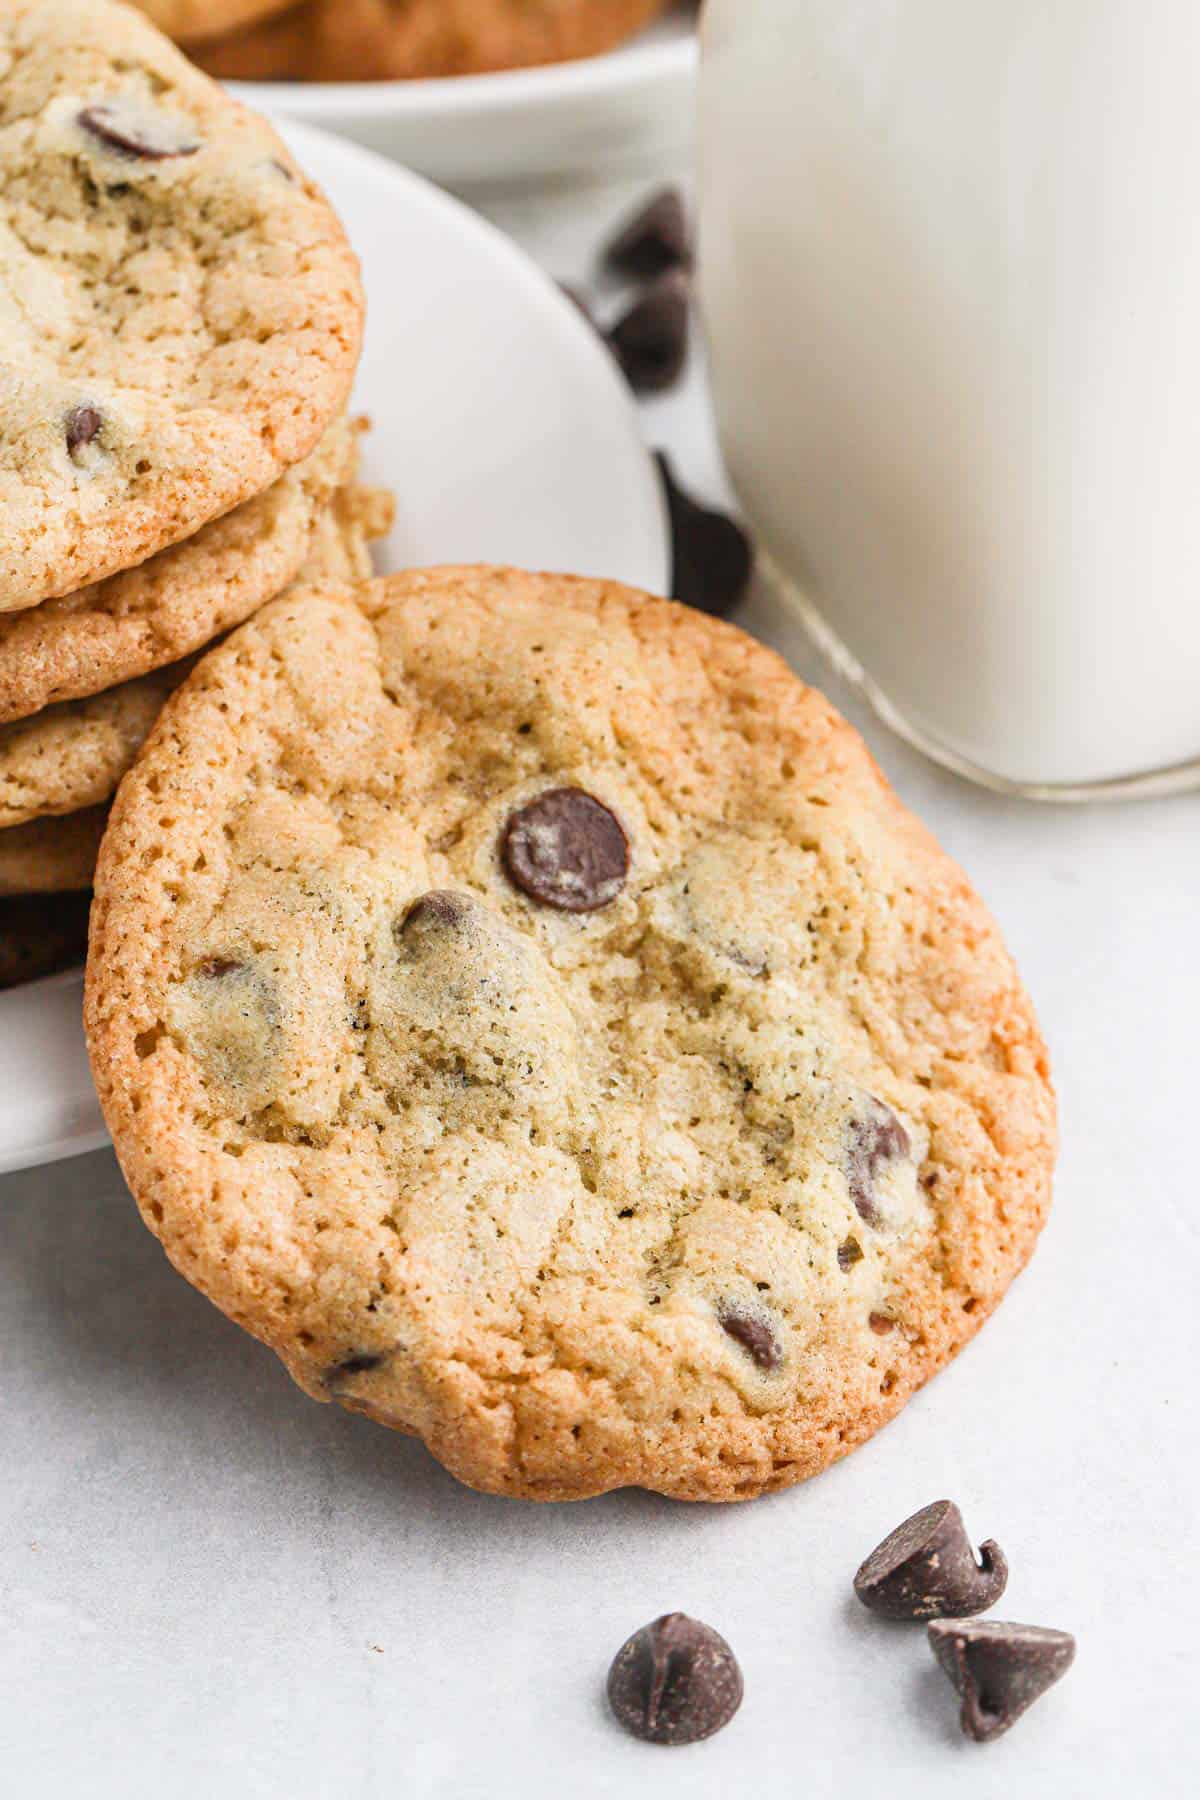 A stack of crispy chocolate chip cookies on a small plate next to a glass of milk with one cookie propped up in front of the stack.